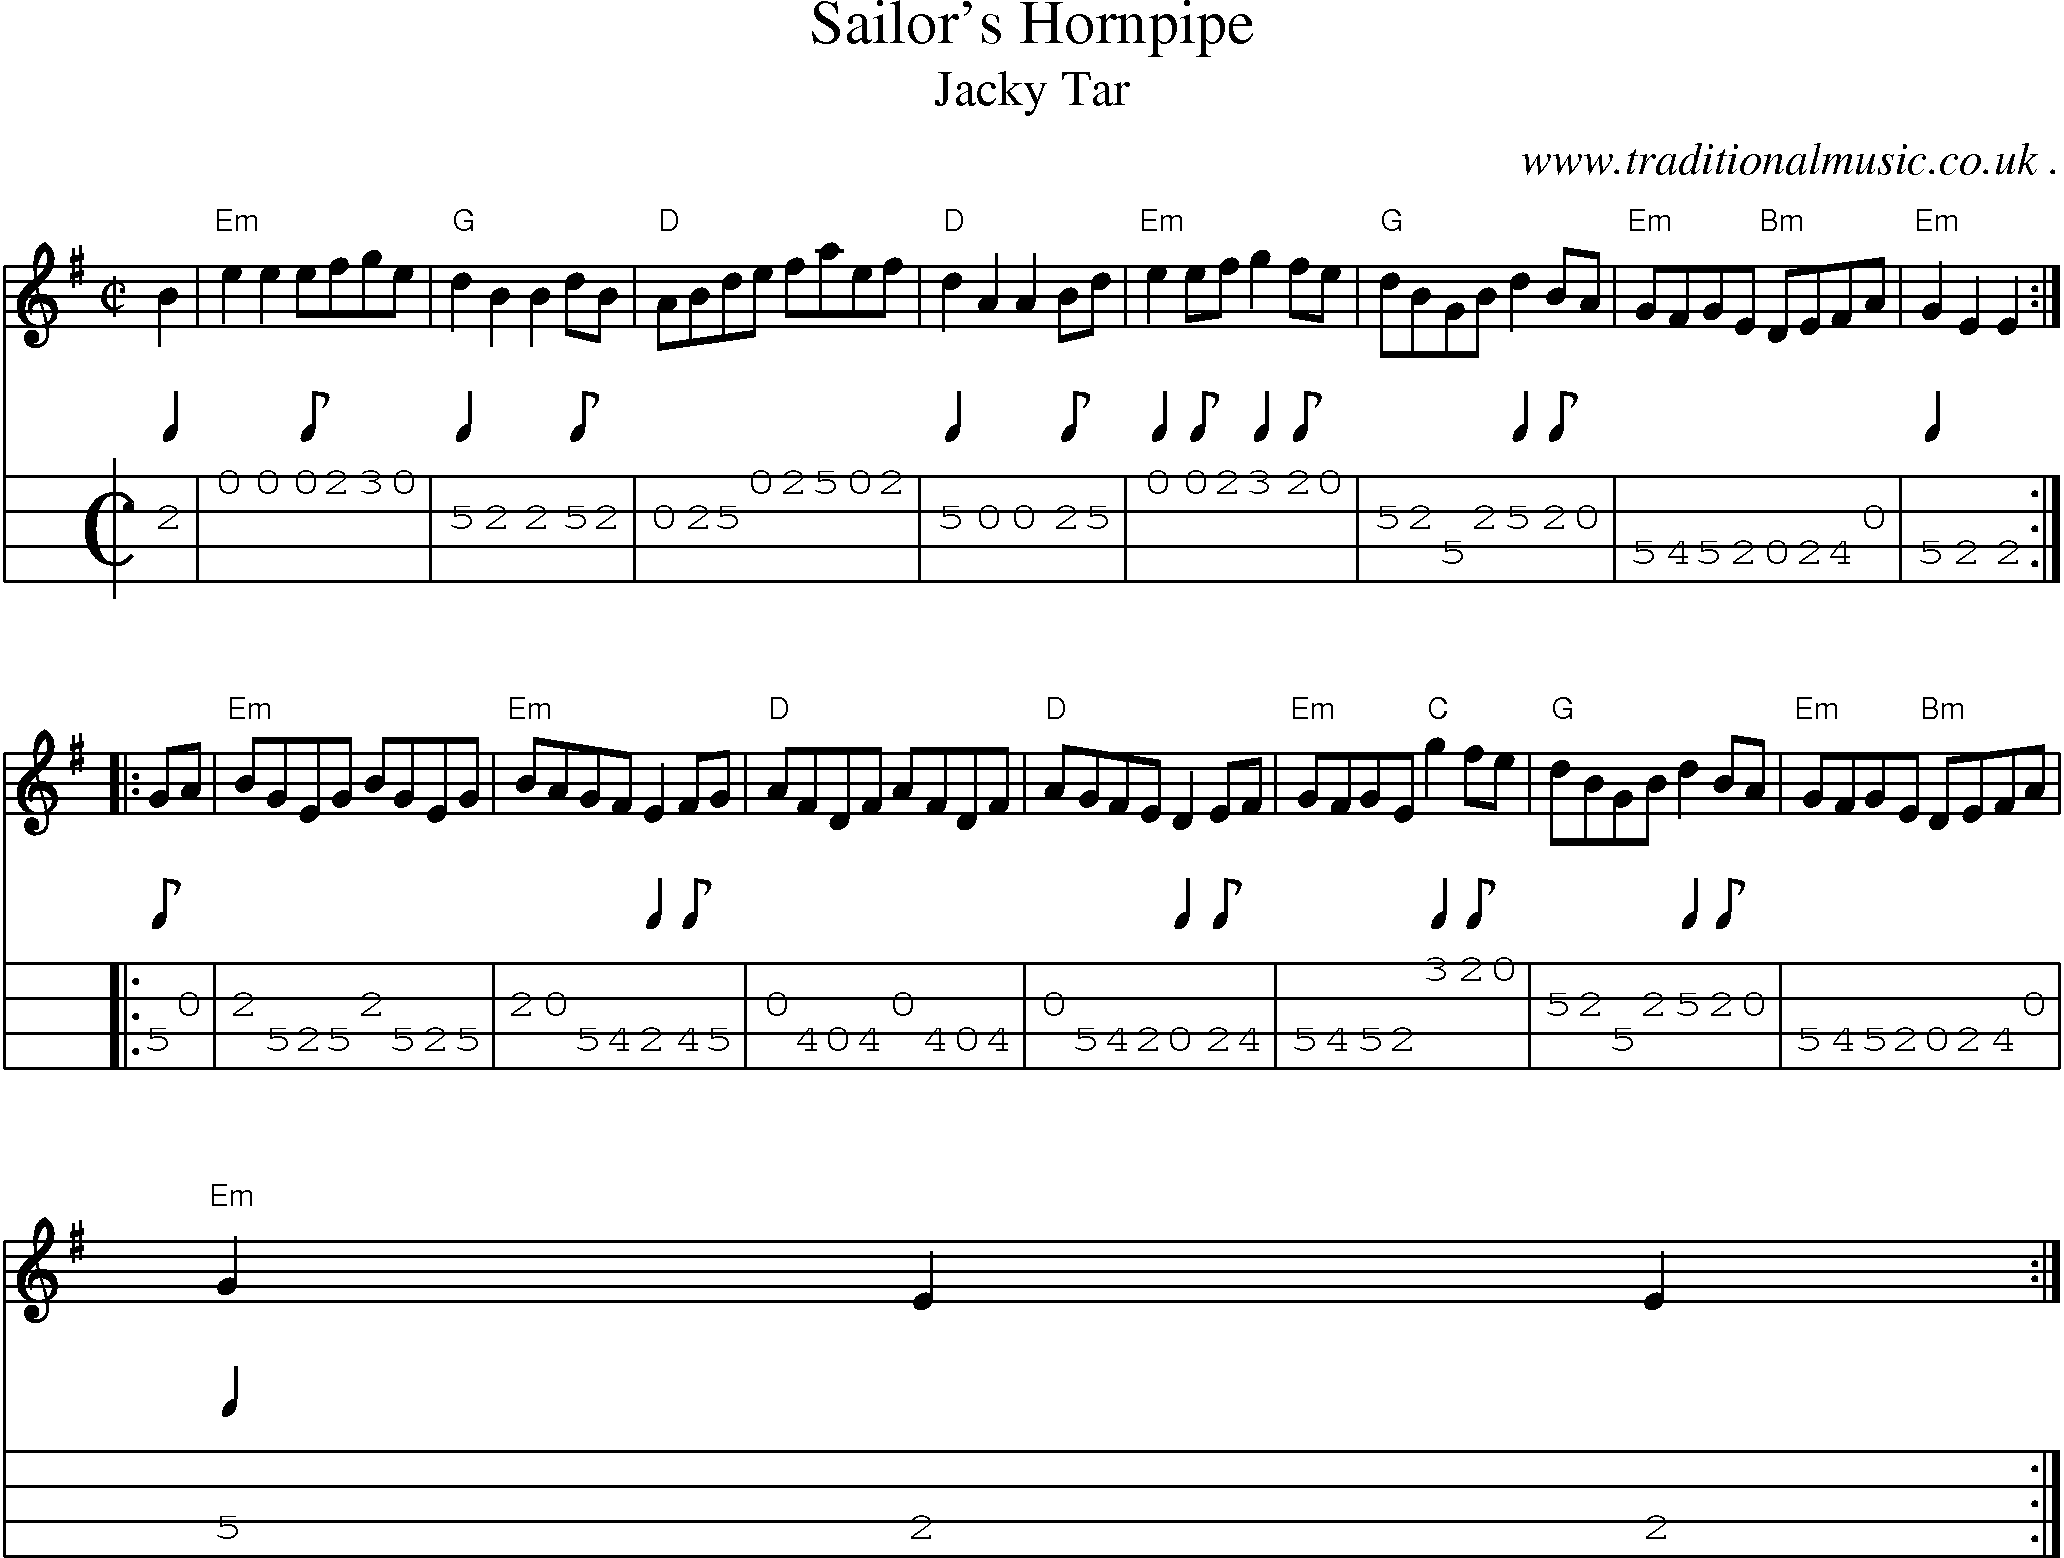 Sheet-music  score, Chords and Mandolin Tabs for Sailors Hornpipe